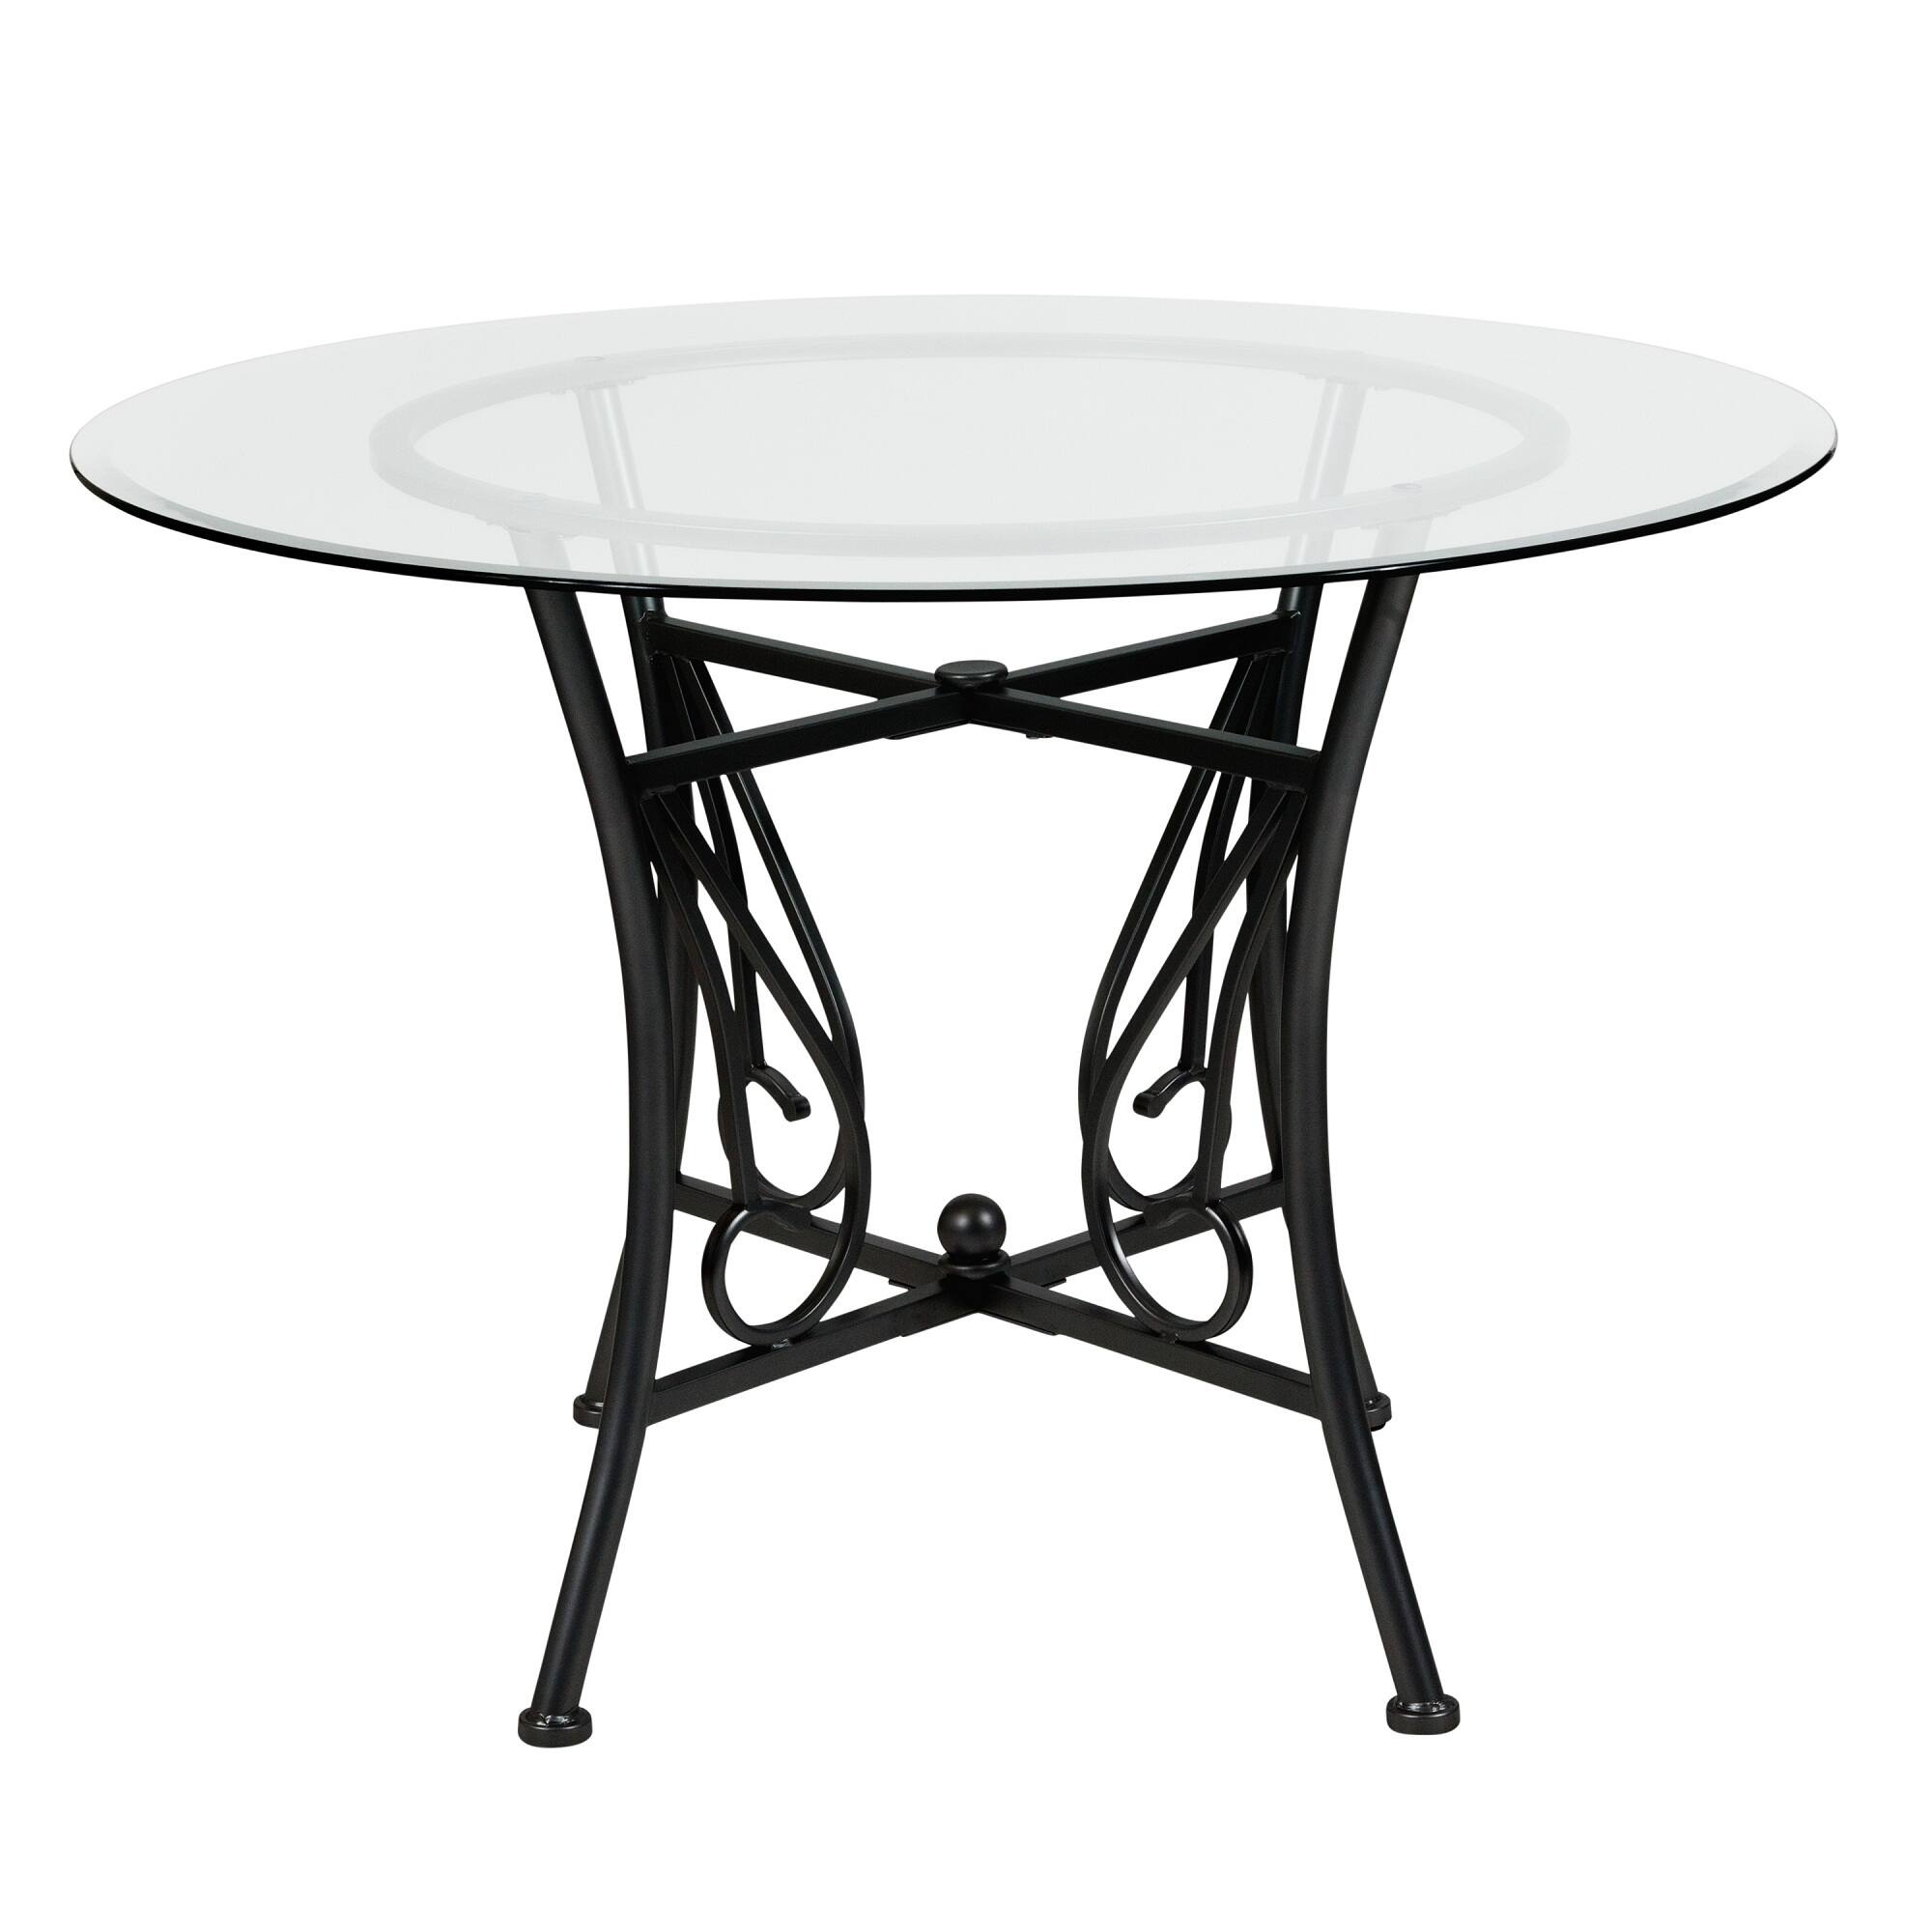 42" Clear and Black Contemporary Round Glass Dining Table